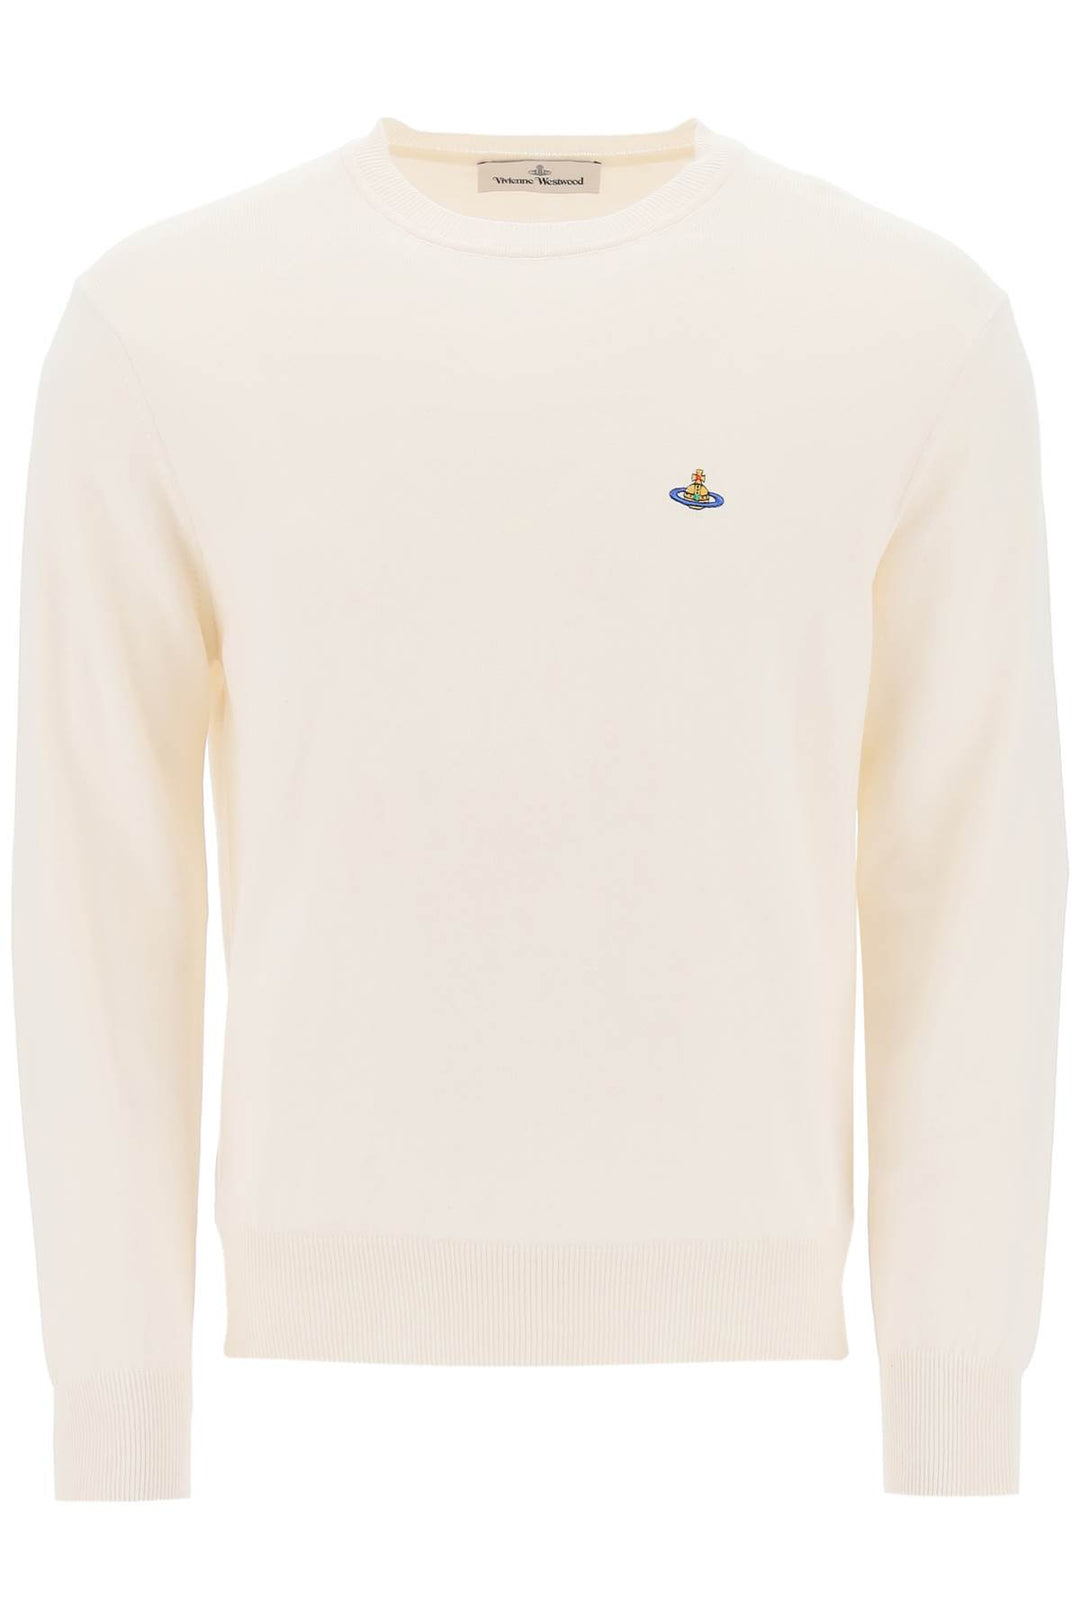 Vivienne westwood organic cotton and cashmere sweater-0